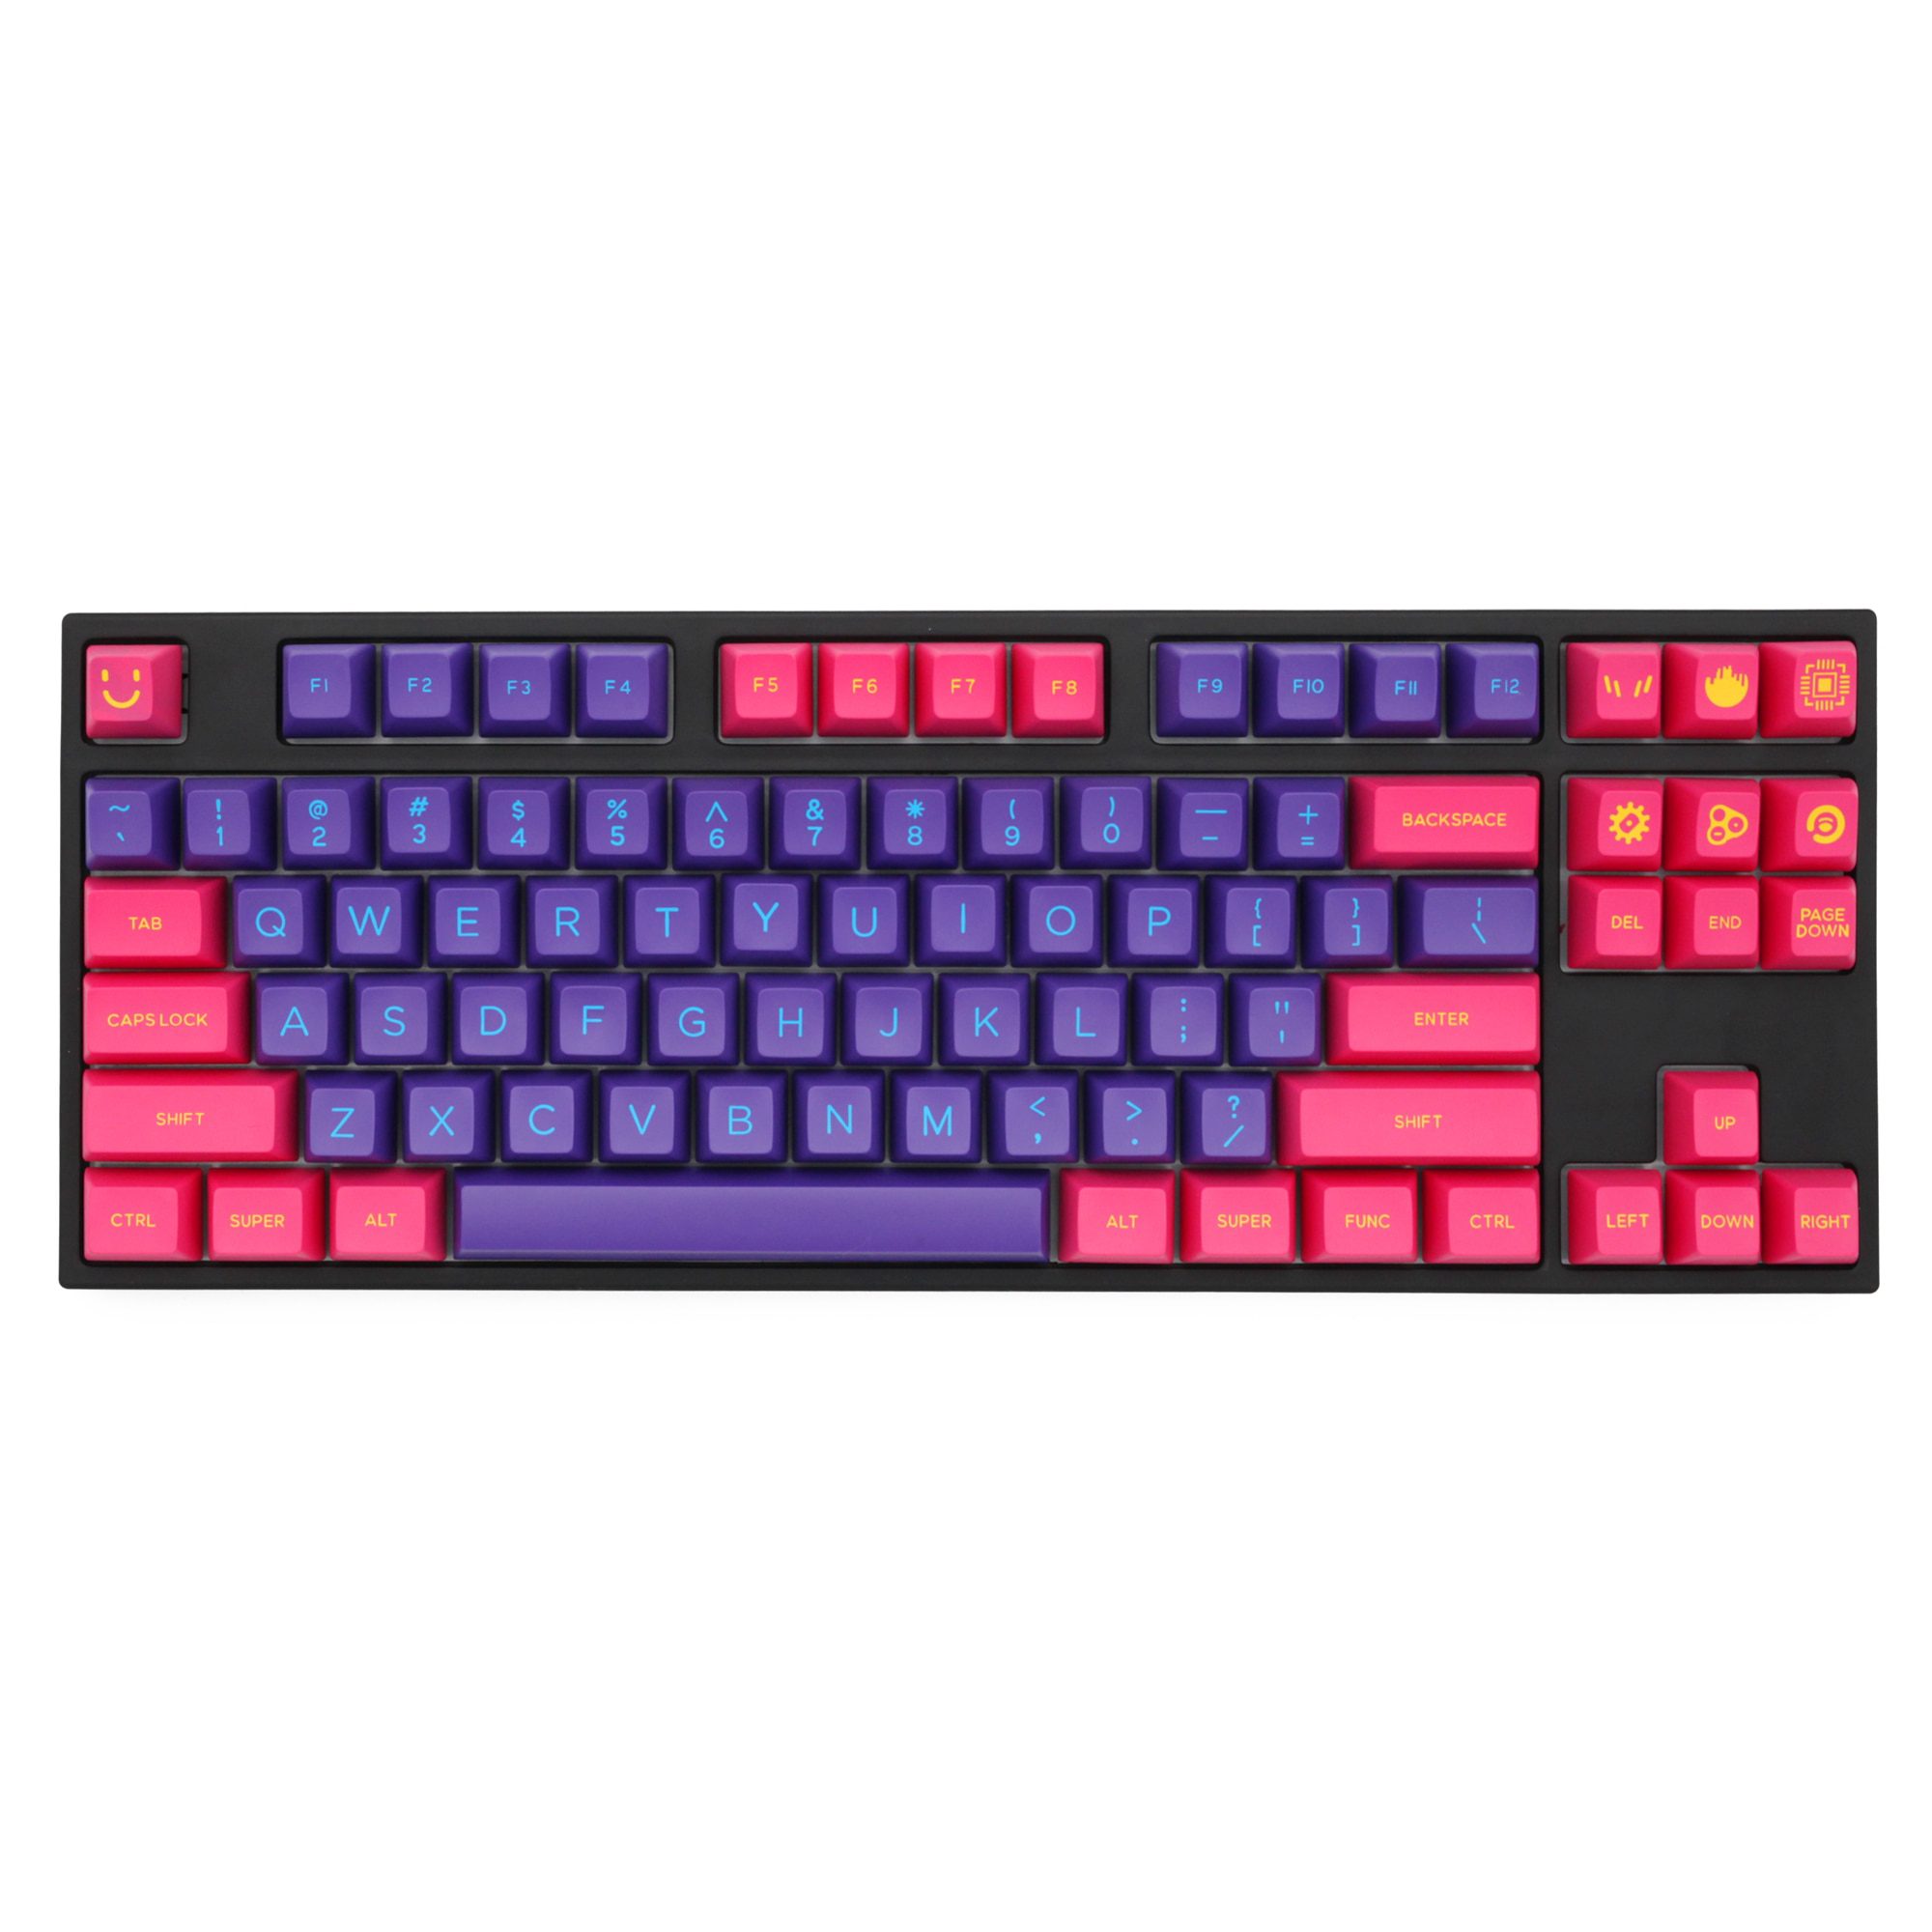 Domikey Cherry Profile abs doubleshot keycap Classic Dolch All in One for mx stem keyboard poker 87 104 gh60 xd64 xd68 BM60 BM65